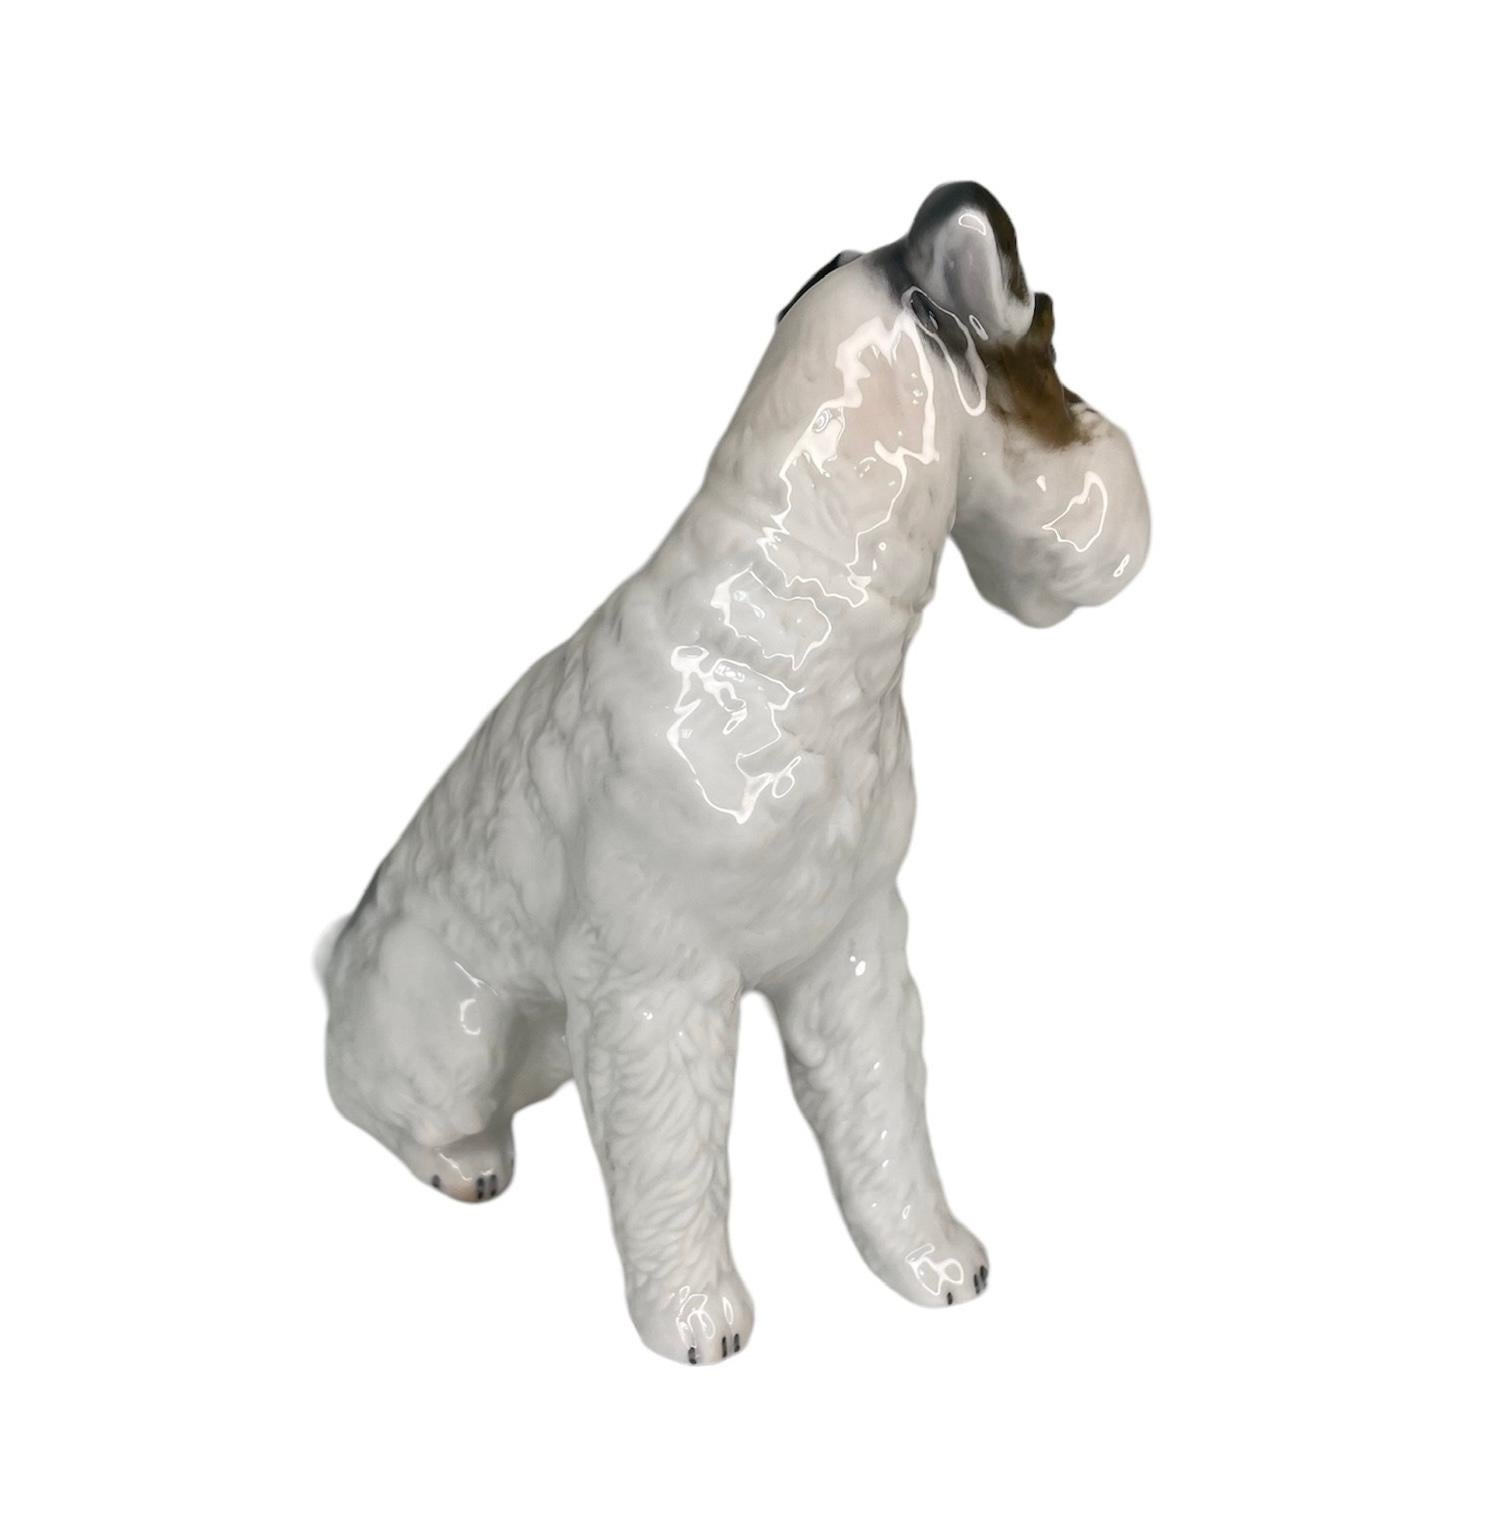 20th Century Rosenthal Porcelain Figurine Of A Fox Terrier Dog For Sale